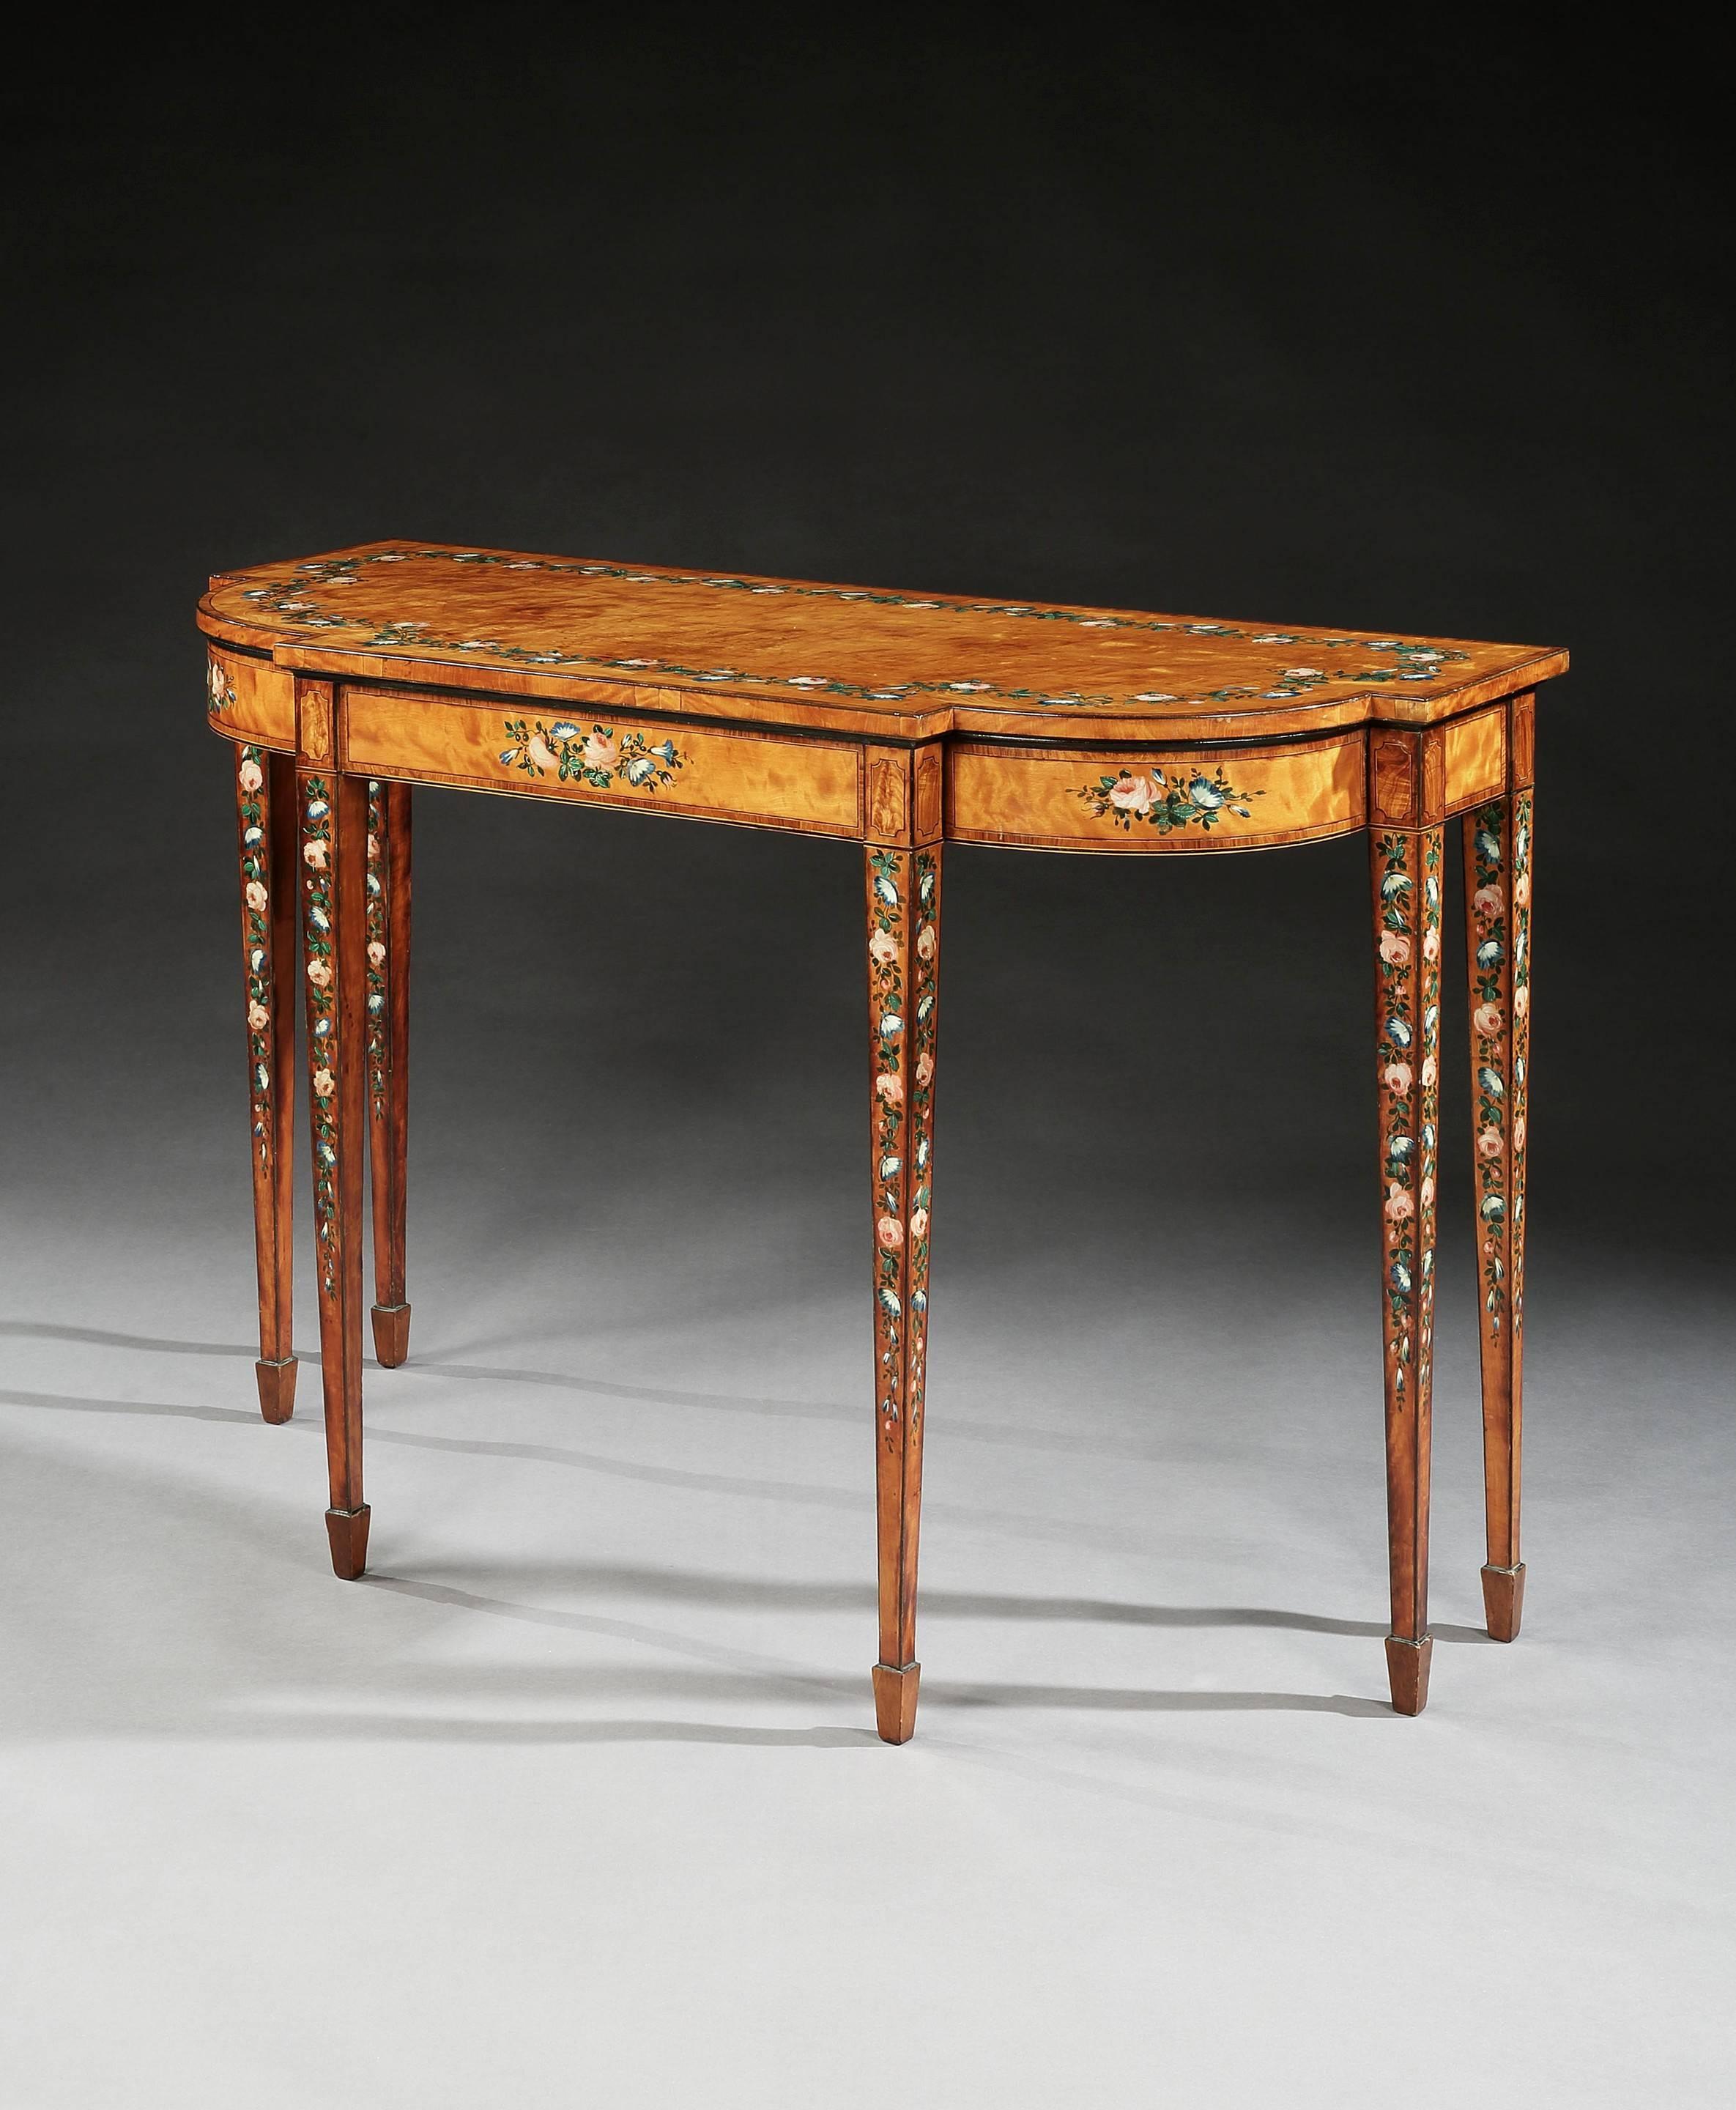 A rare George III Sheraton period satinwood console table, with kingwood crossbanding and painted floral decoration, the shaped top above a ebony-strung satinwood breakfront frieze, standing on square tapering legs with spade feet. The whole